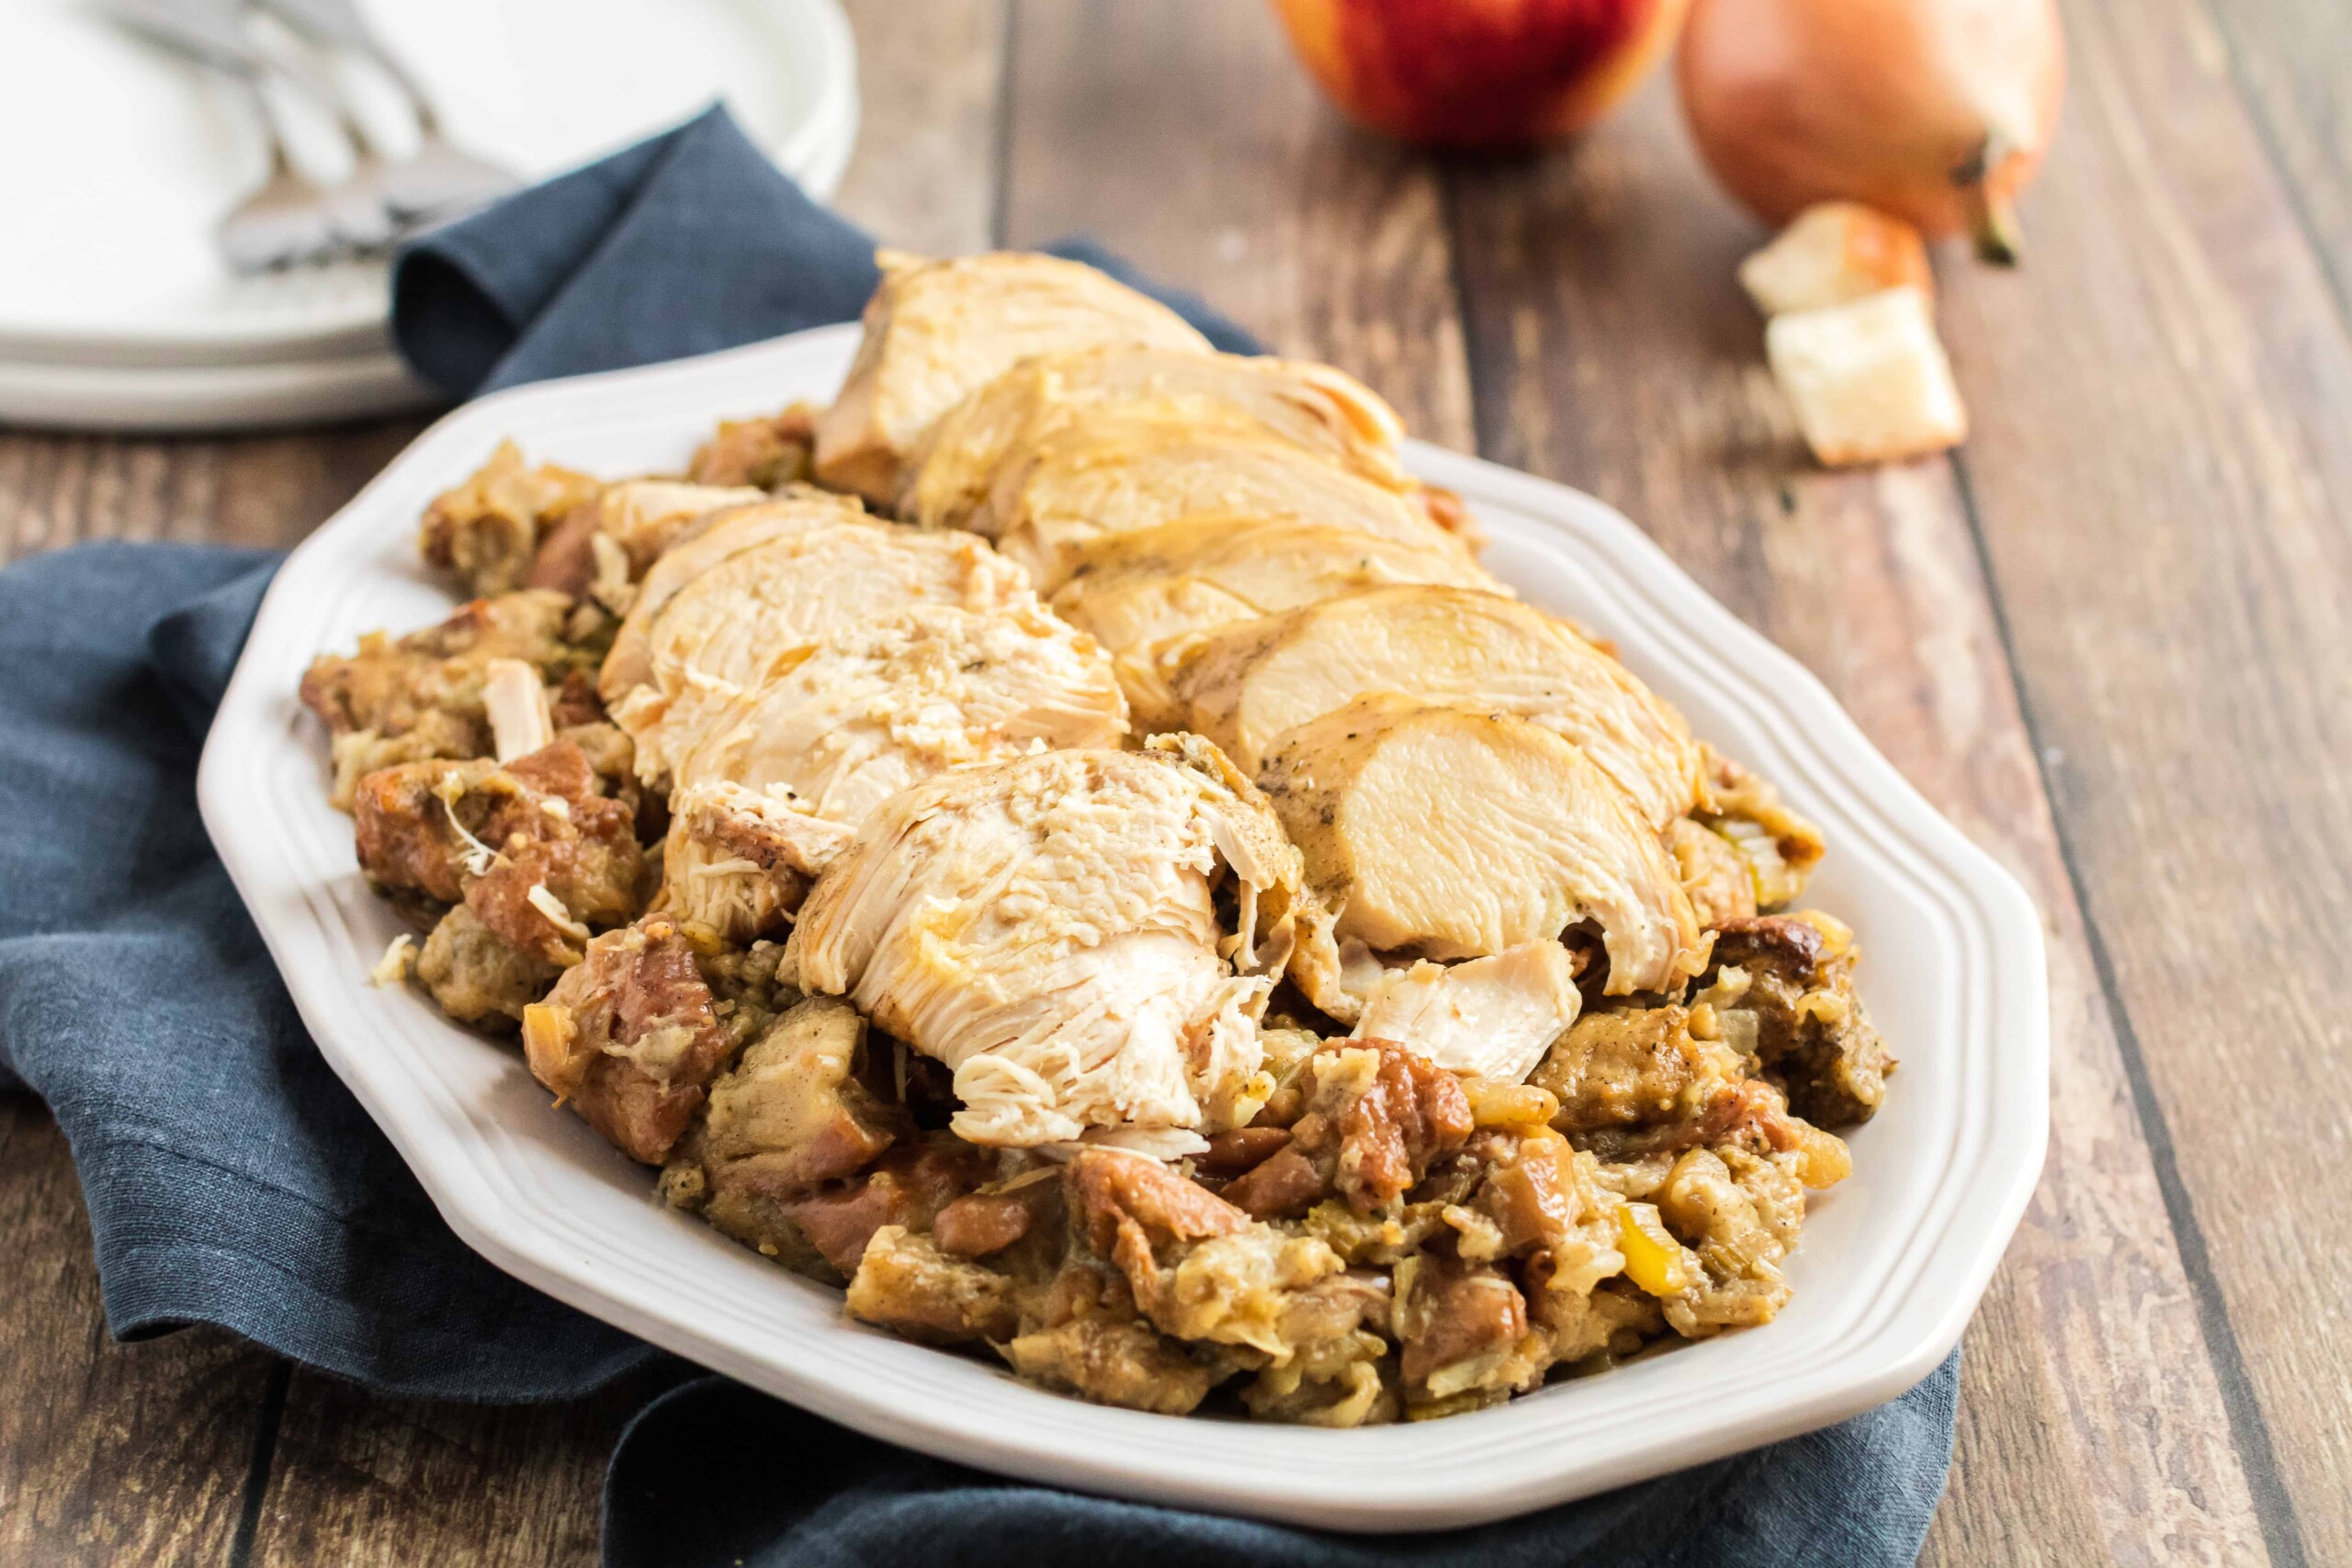 Sliced turkey breast on a plate of stuffing.